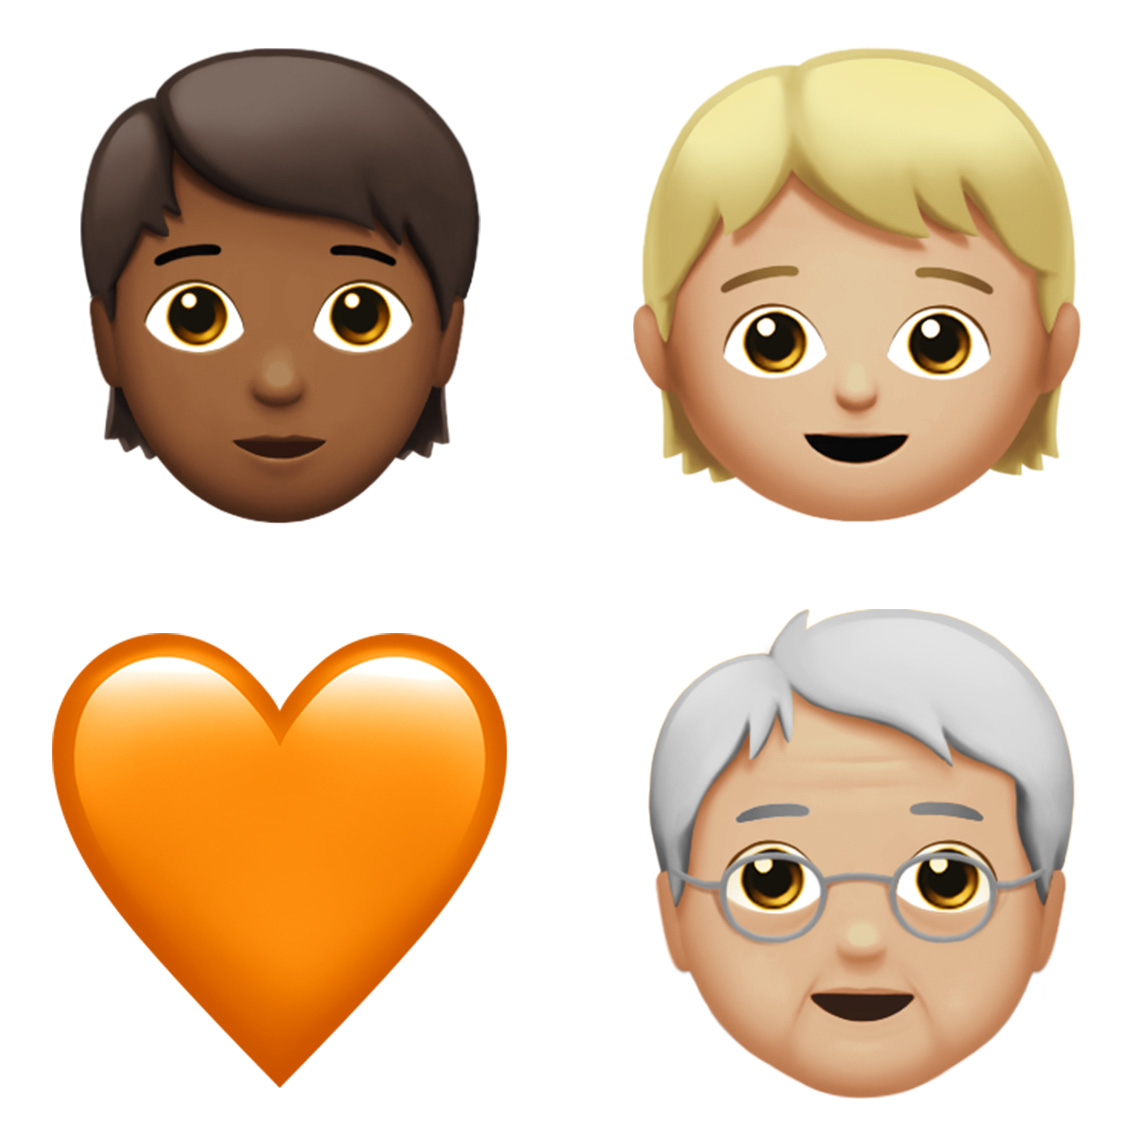 Apple reveals new emoji coming to iPhone and iPad, including “I love